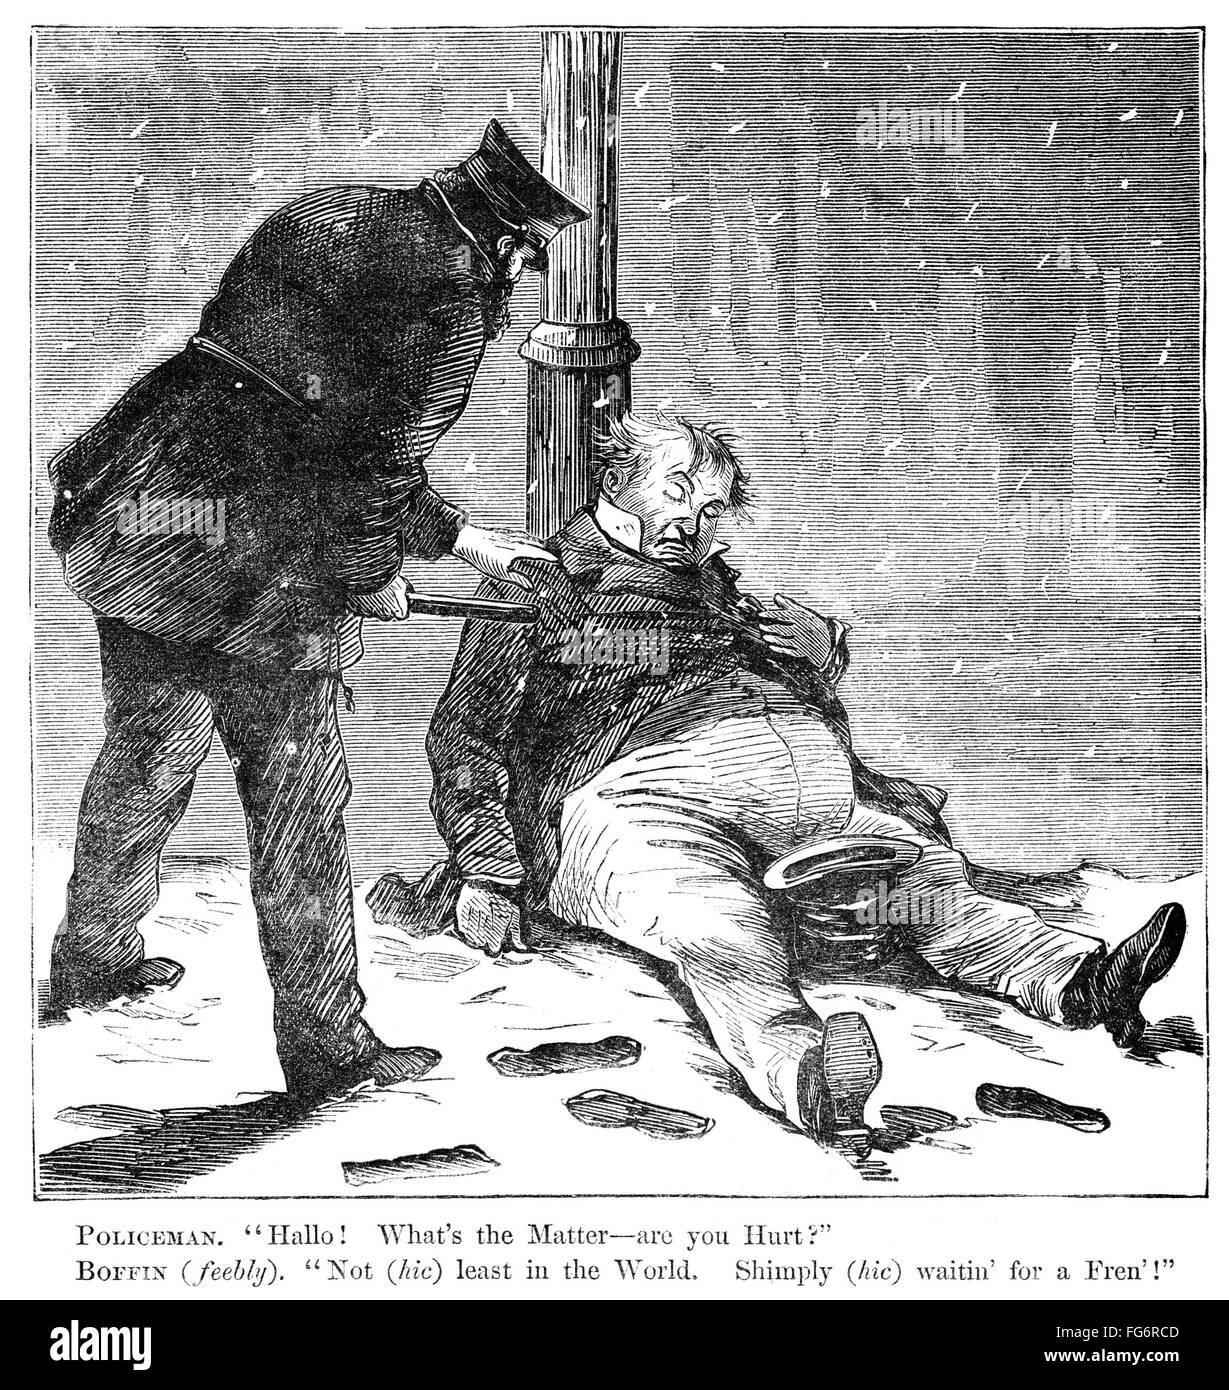 CARTOON: DRUNKENNESS, 1869. /n'Policeman. 'Hallo! What's the Matter - are you hurt?' Boffin (feebly). 'Not (hic) least in the World. Shimply (hic) waitin' for a Fren'!'' American cartoon, 1869. Stock Photo